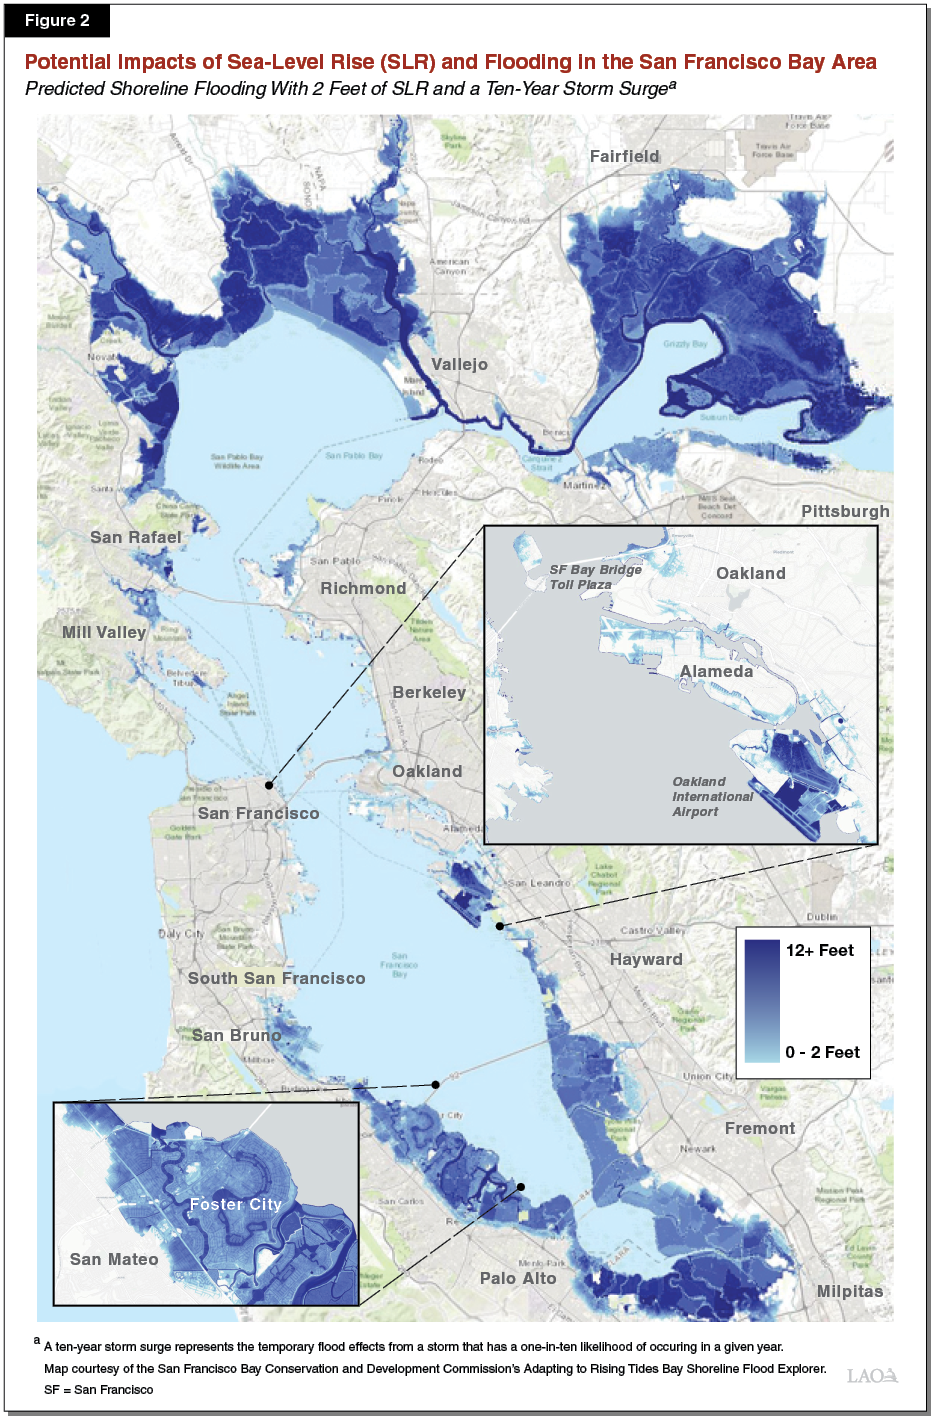 Figure 2 - Potential Impacts of Flooding and Sea-Level Rise in the San Francisco Bay Area